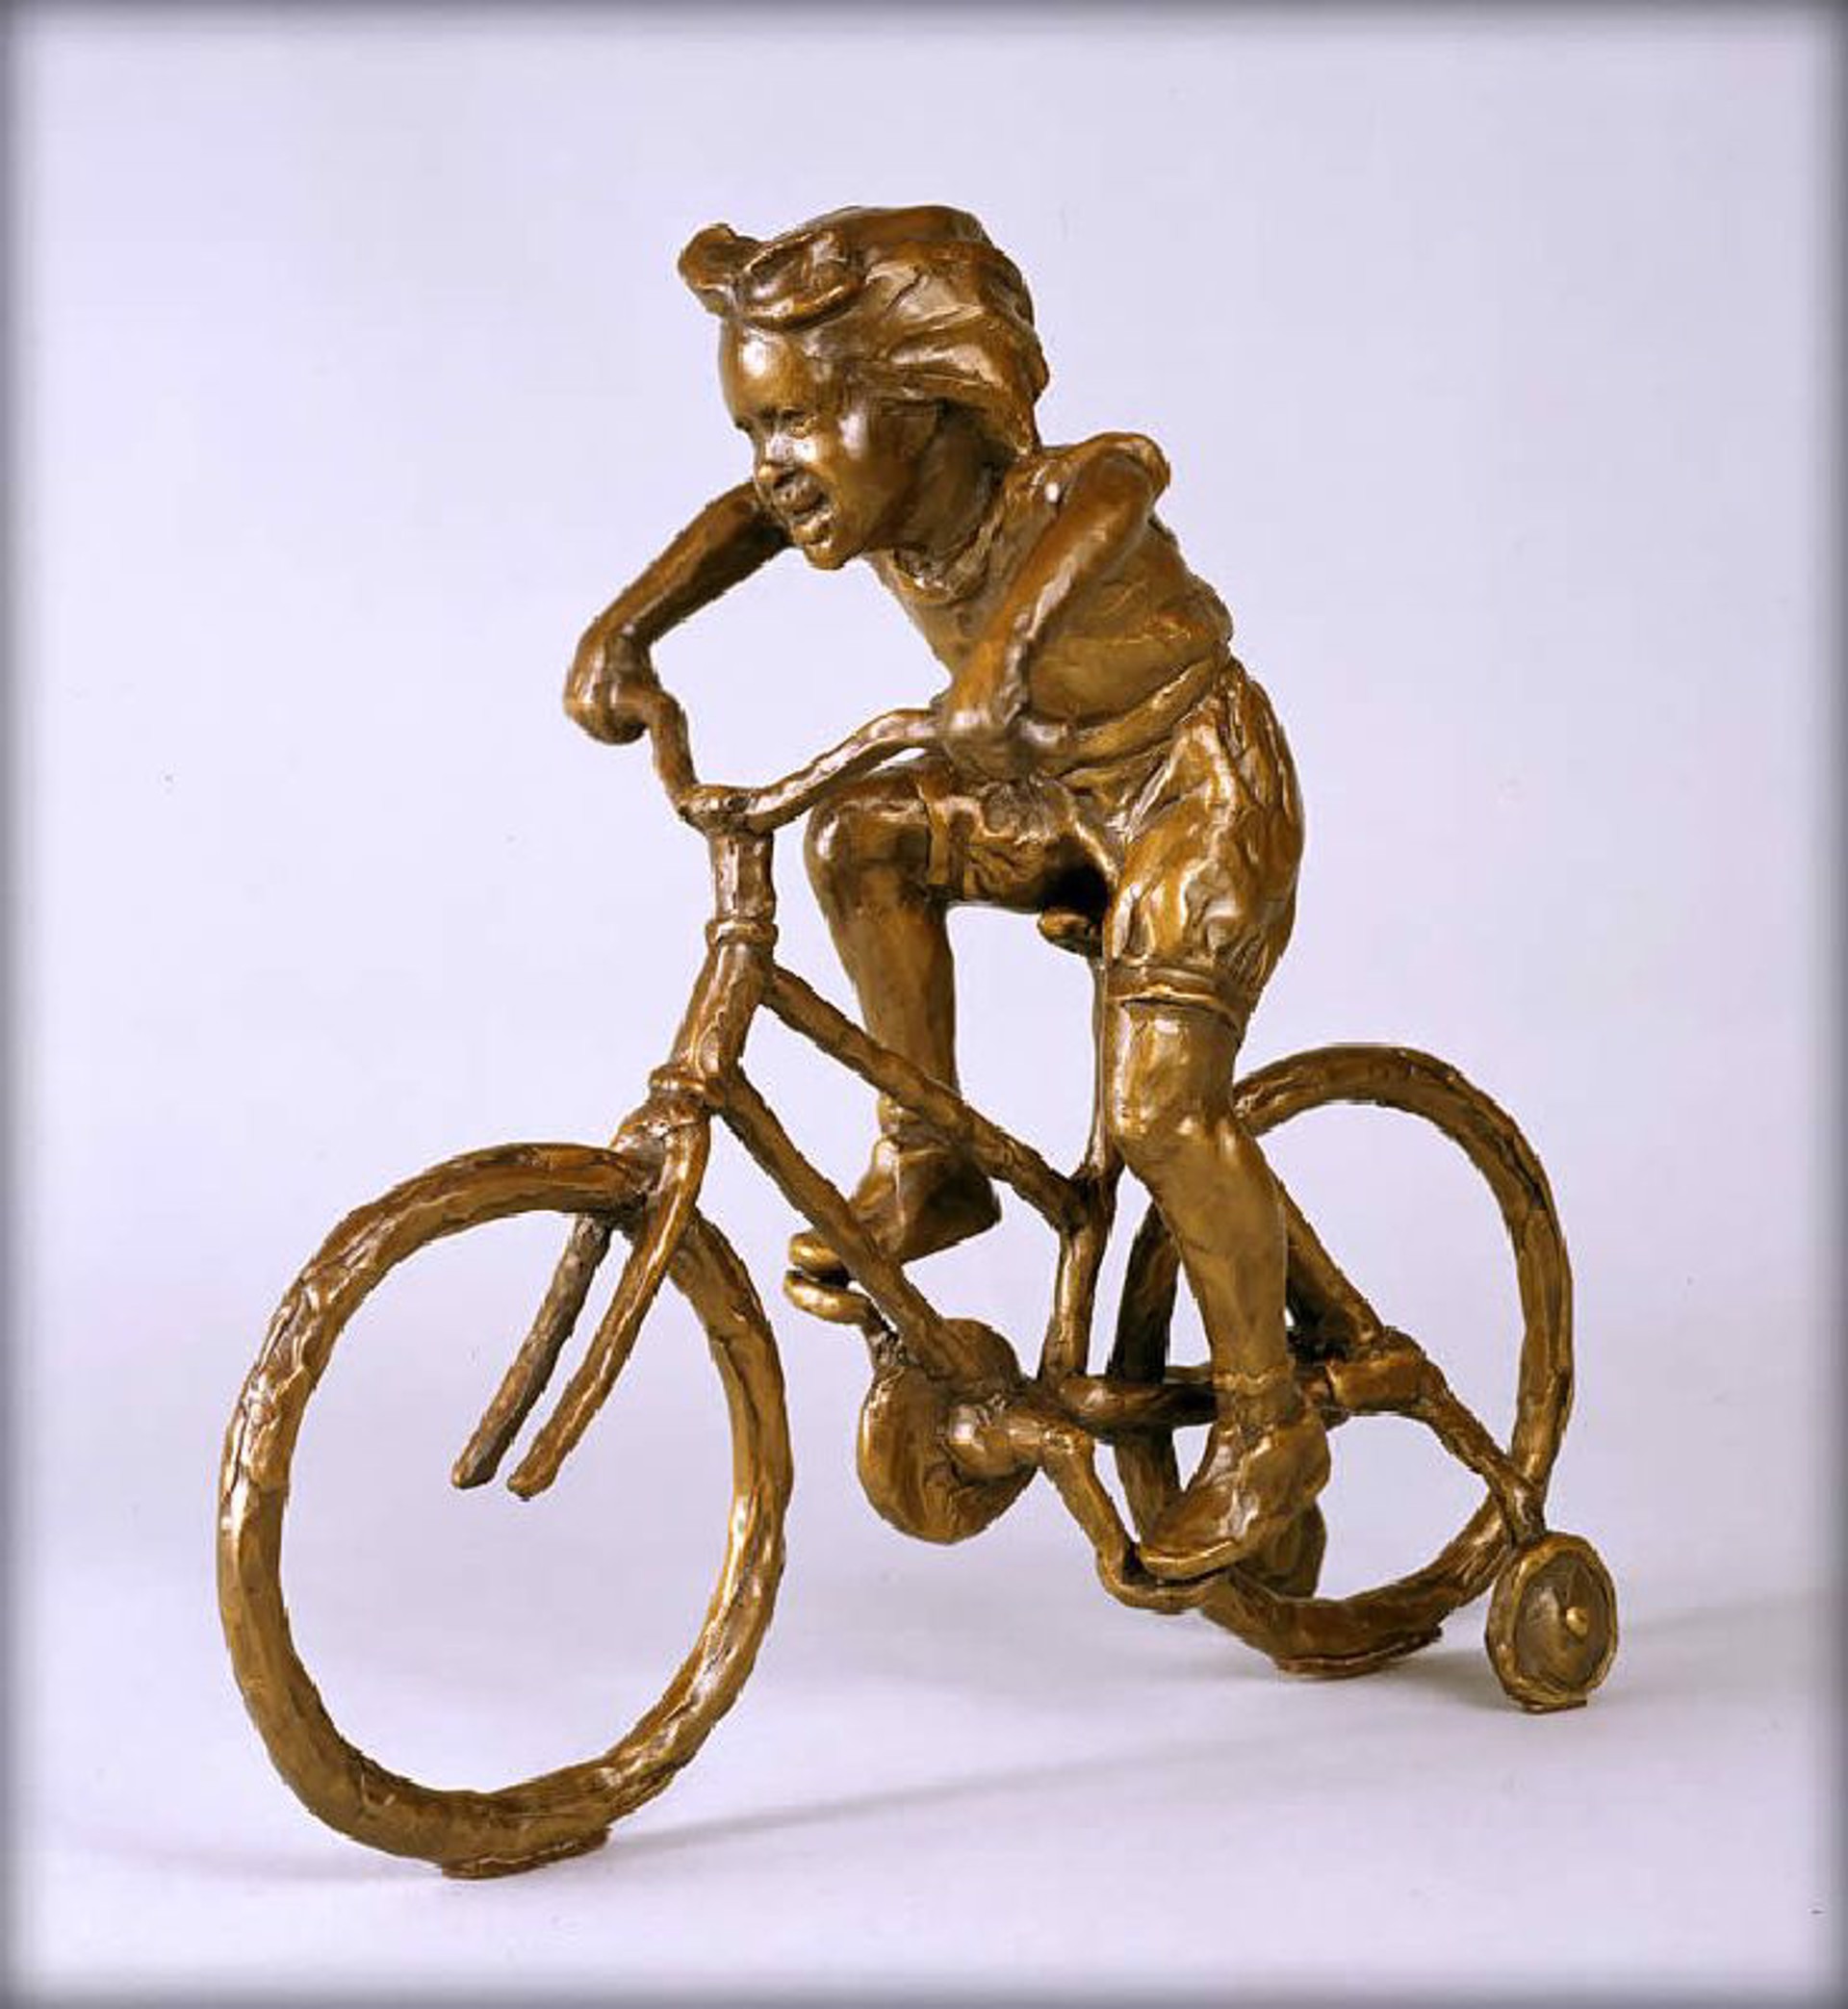 Training Wheels by Gary Lee Price (sculptor)